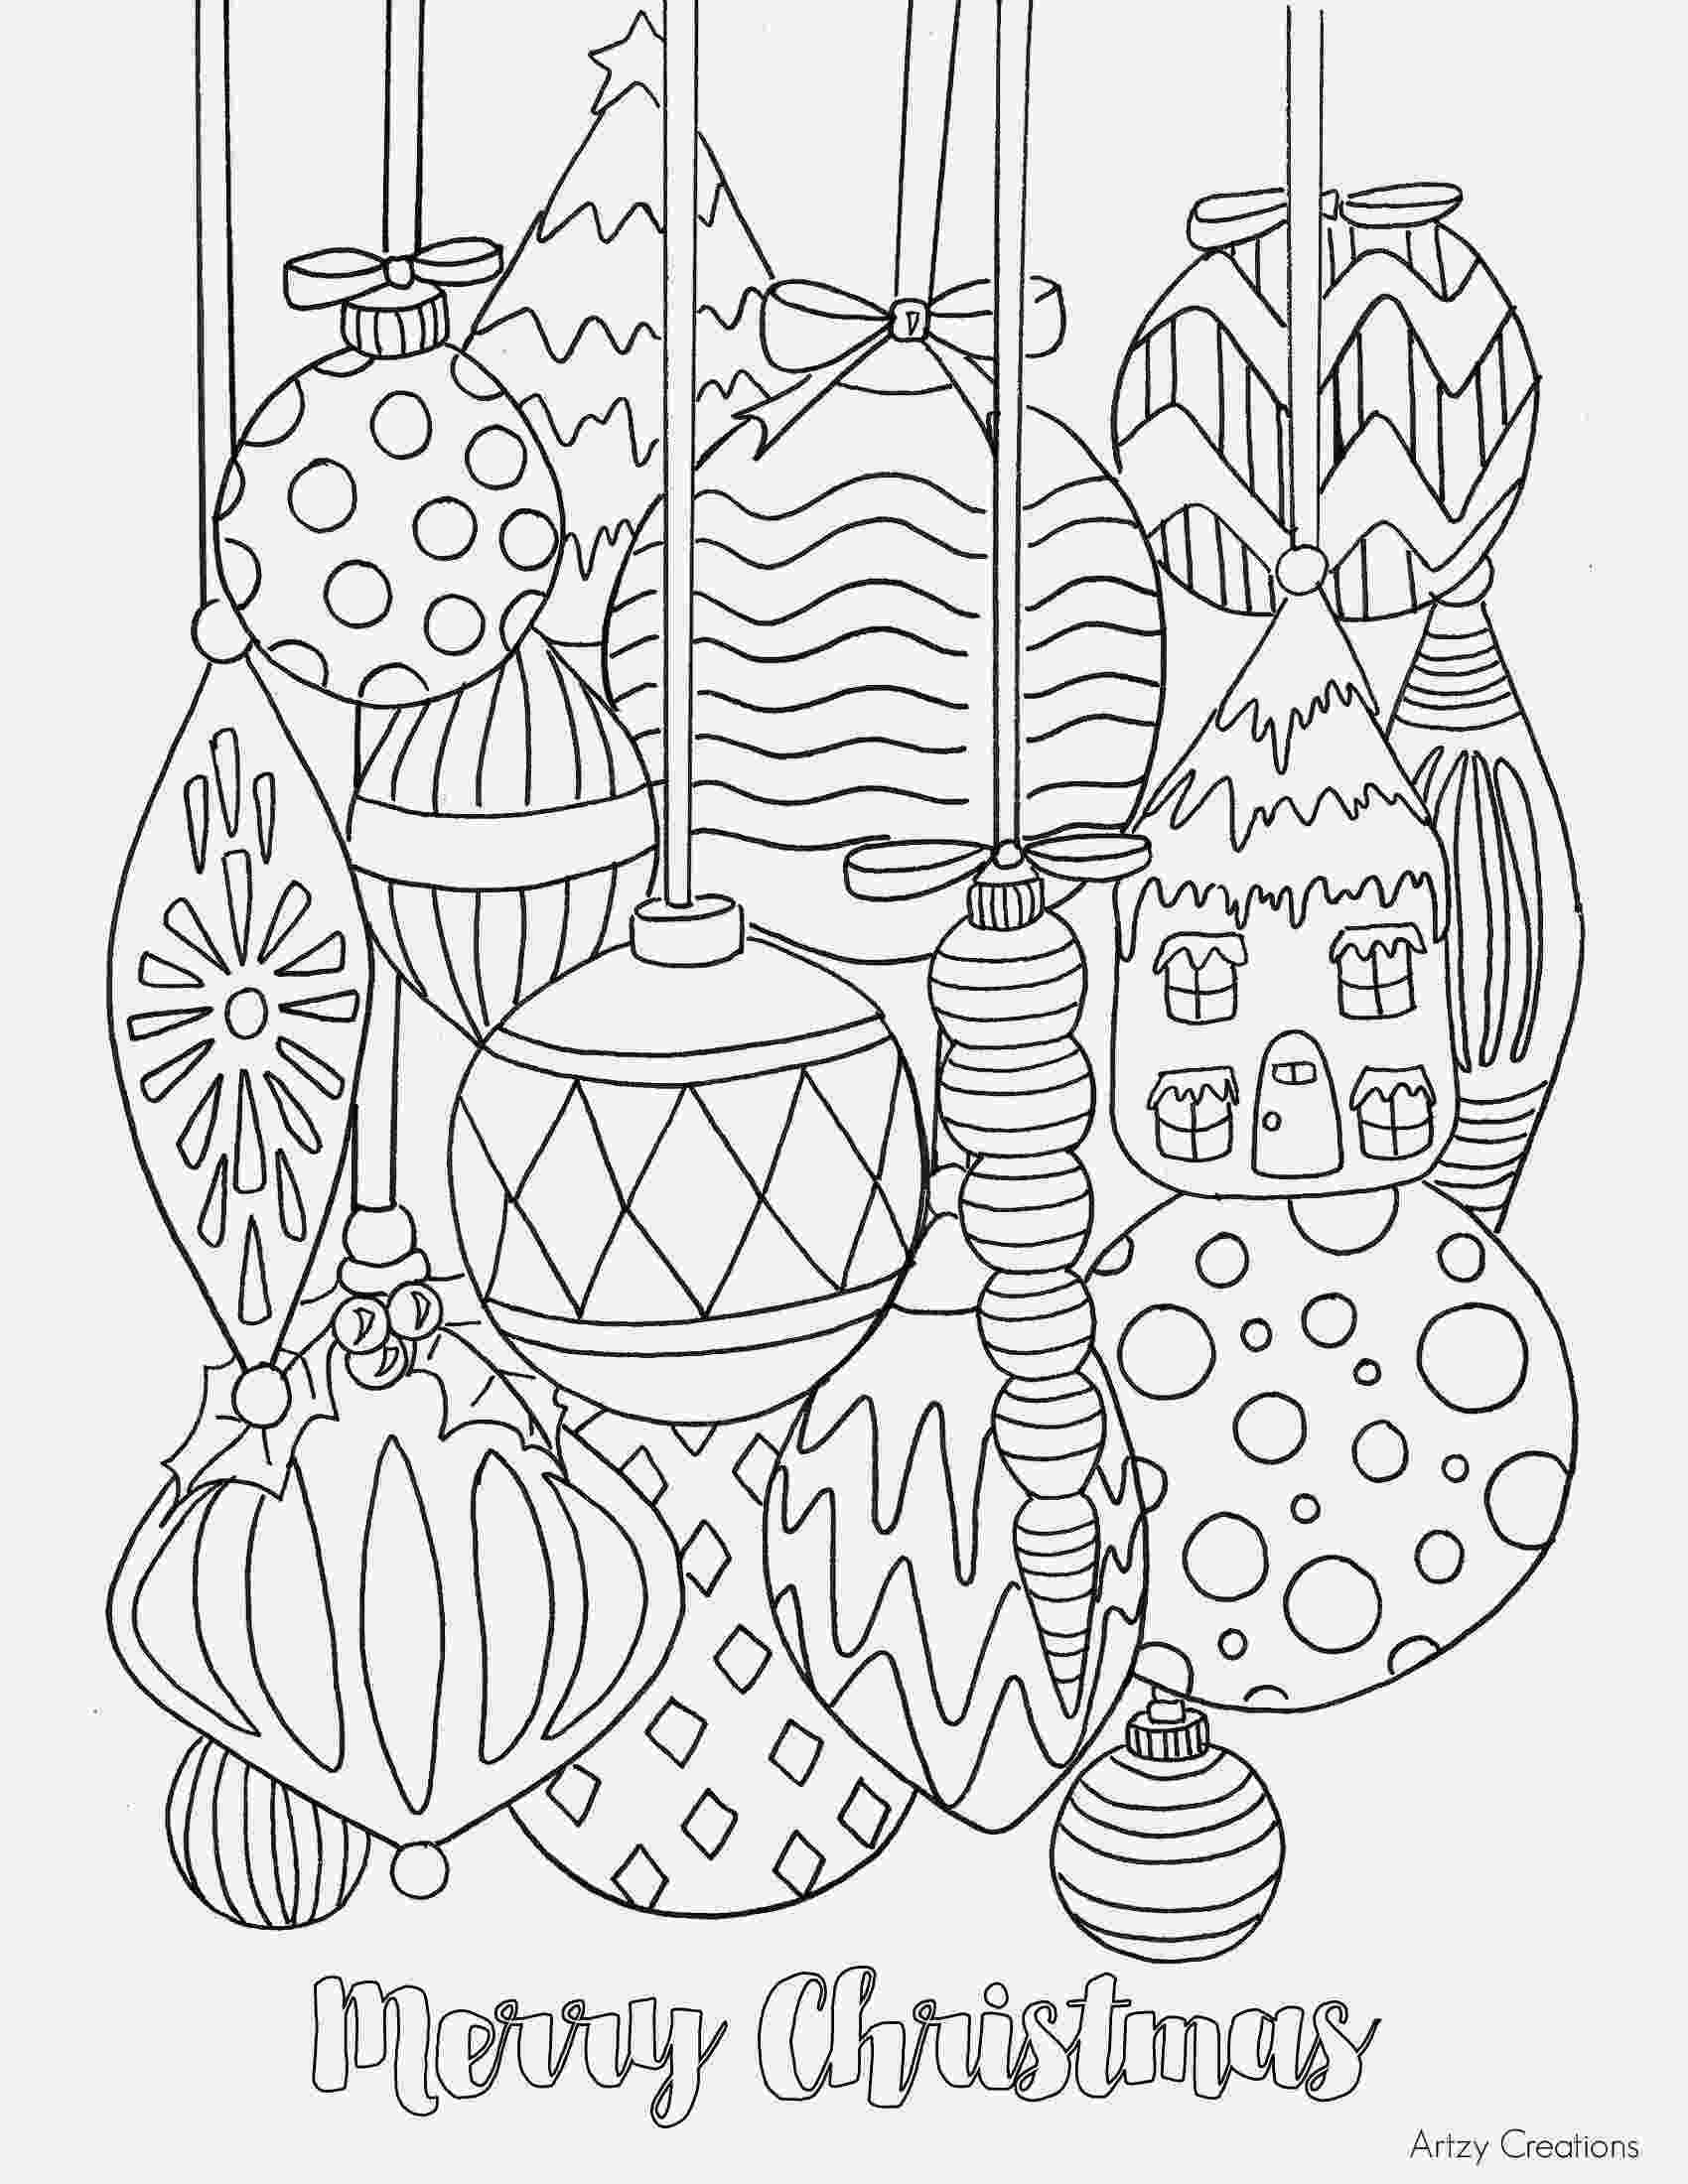 lego christmas coloring pages lego friends christmas coloring pages coloring pages coloring lego christmas pages 